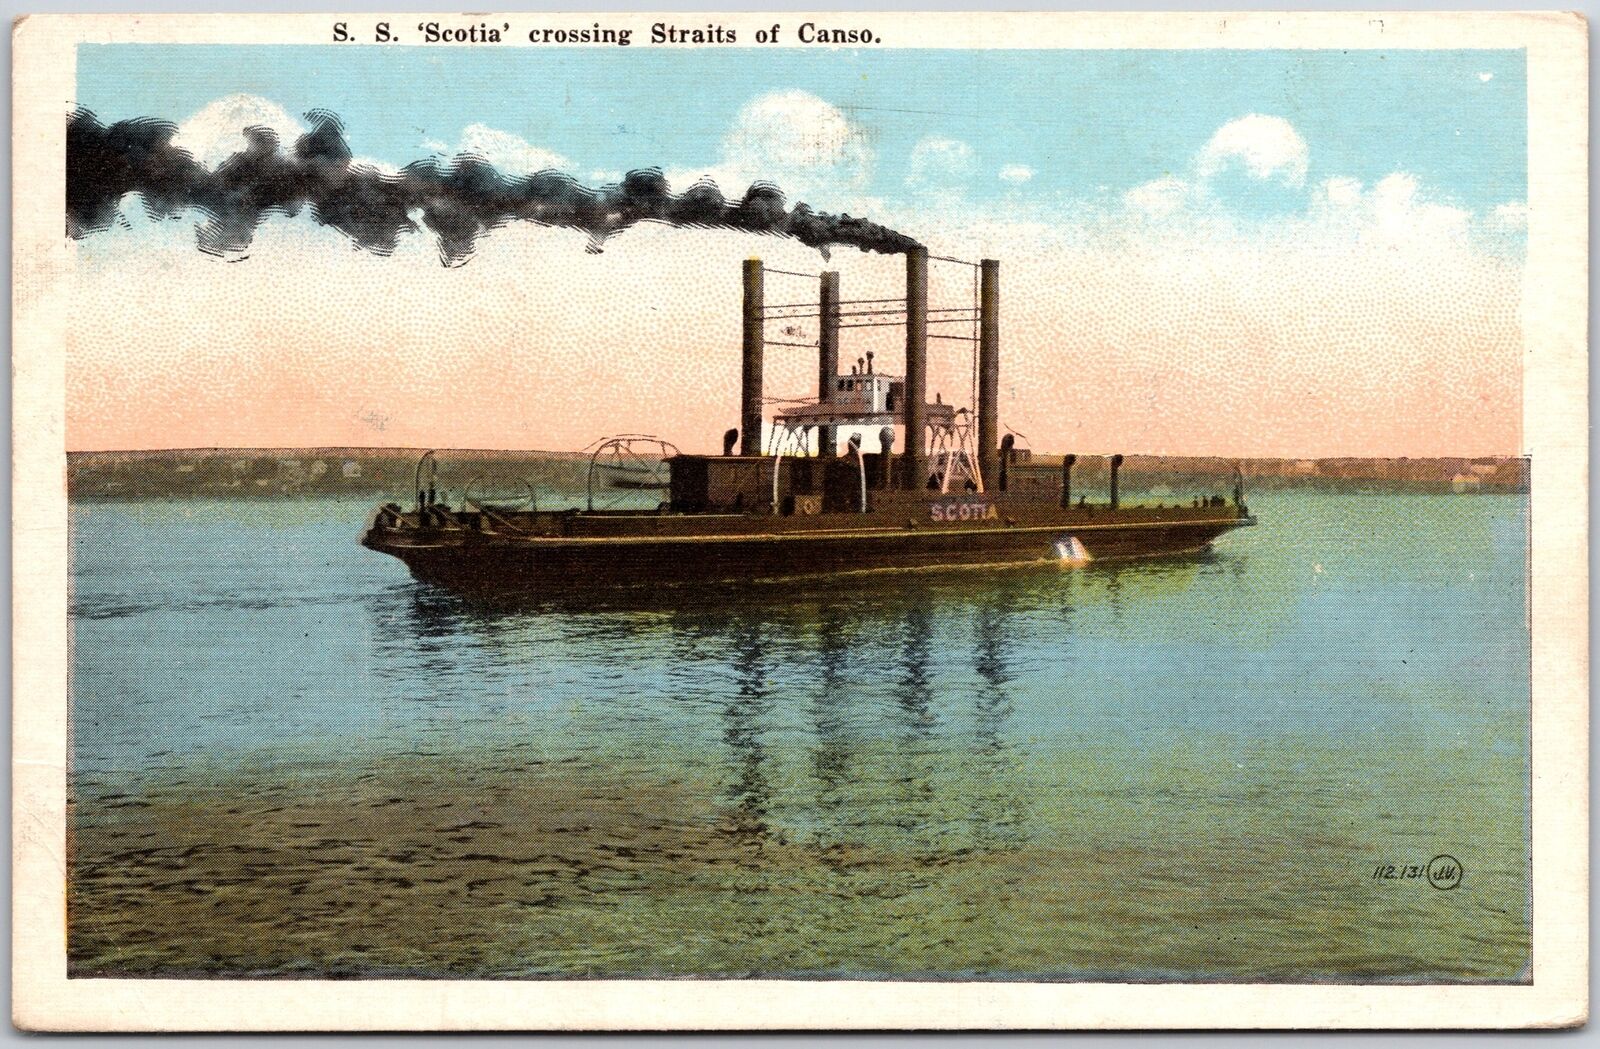 1914 S. S. Scotia Crossing Straits Of Canso Posted Postcard